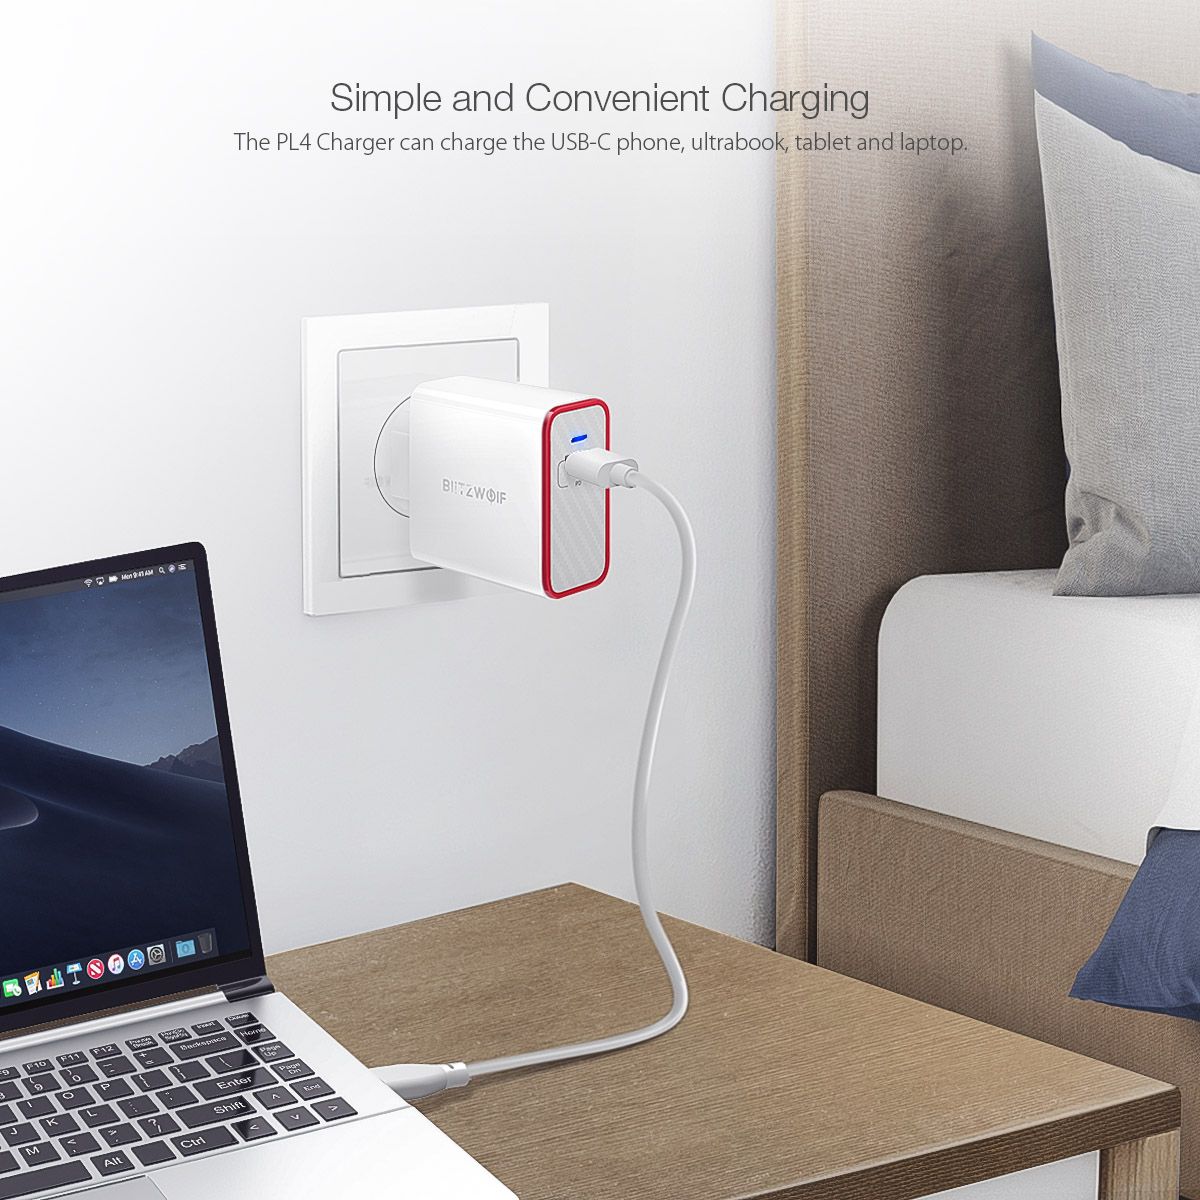 BlitzWolfreg-BW-PL4-45W-USB-C-PD-Charger-PD30-Power-Delivery-Wall-Charger-EU-Plug-Adapter-For-iPhone-1347712